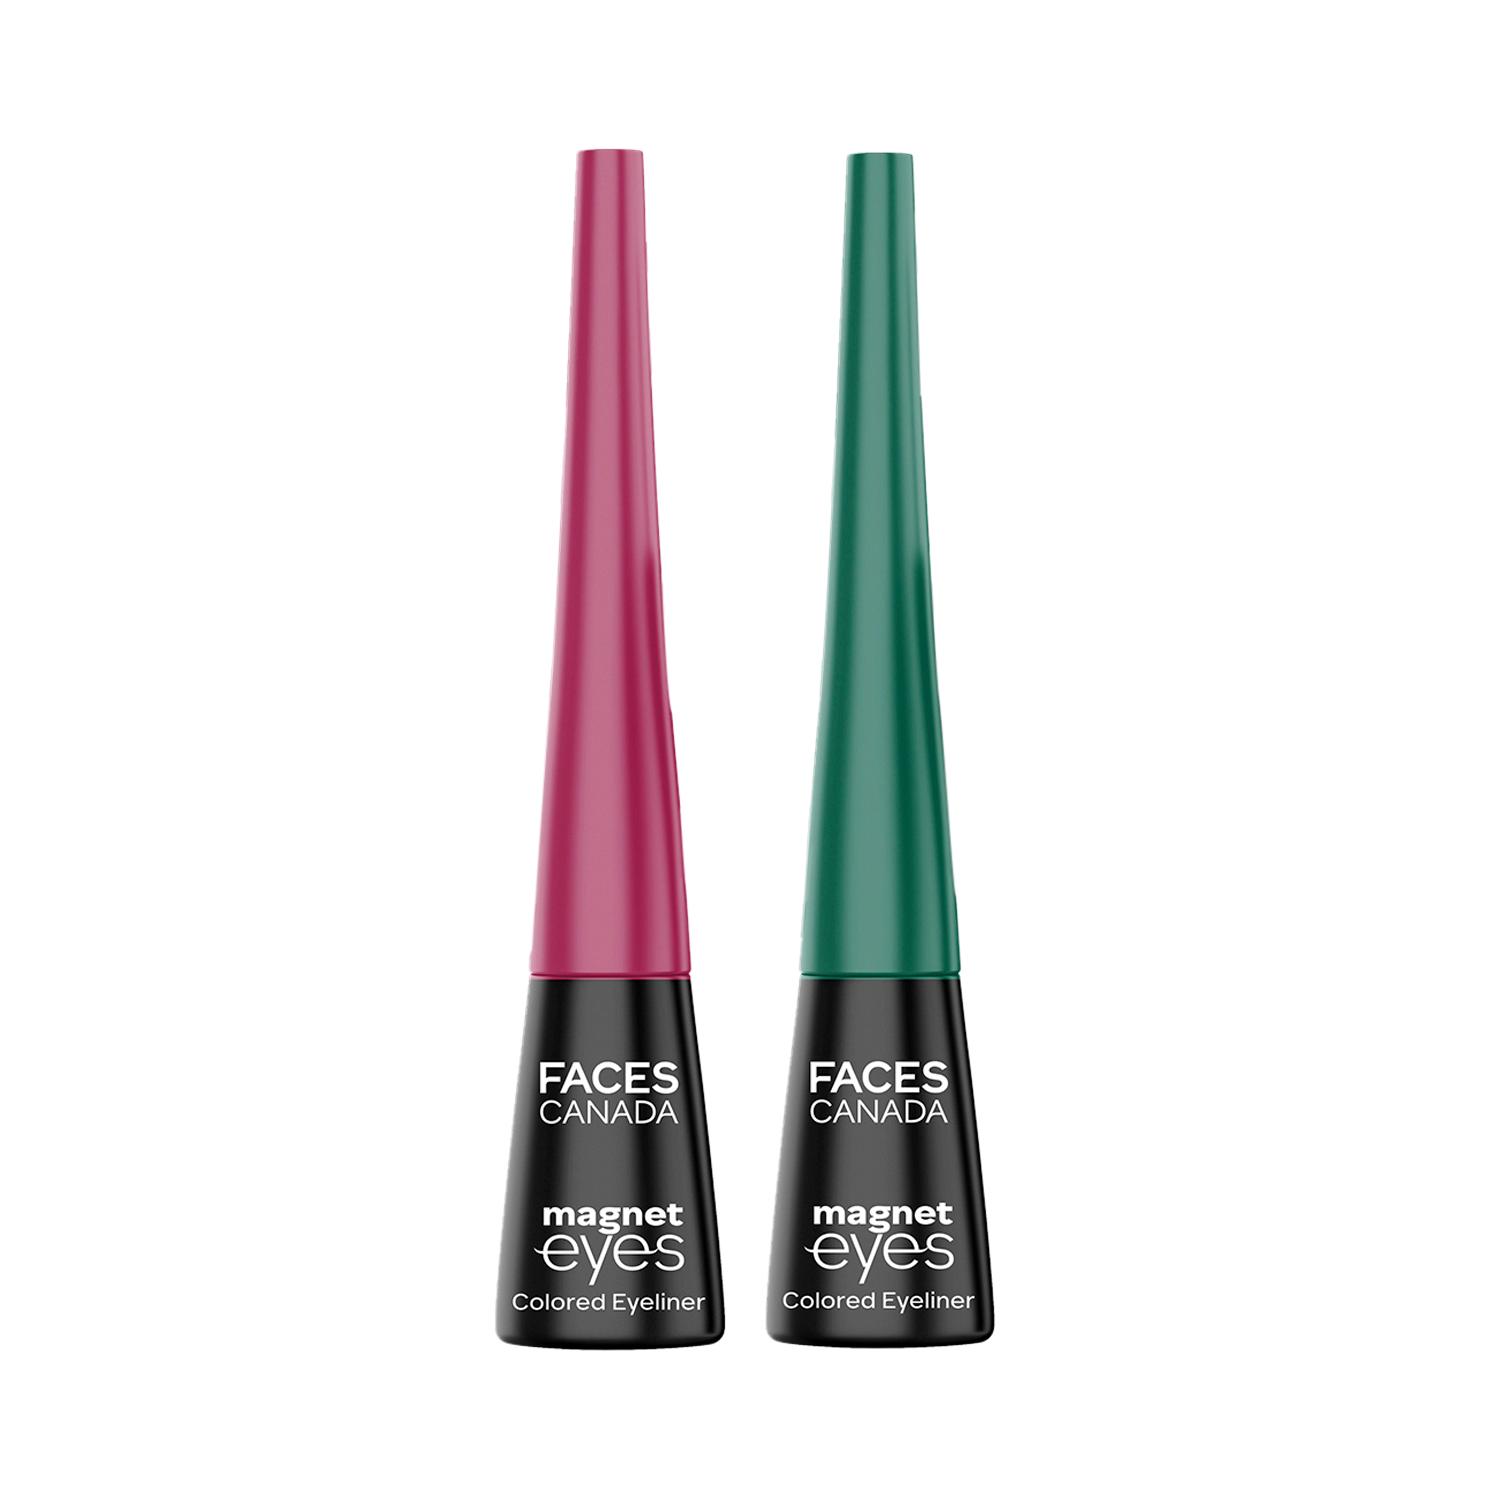 Faces Canada | Faces Canada Magneteyes Color Eyeliners Pack of 2 Elegant Green and Burgundy (4ml x 2) Combo